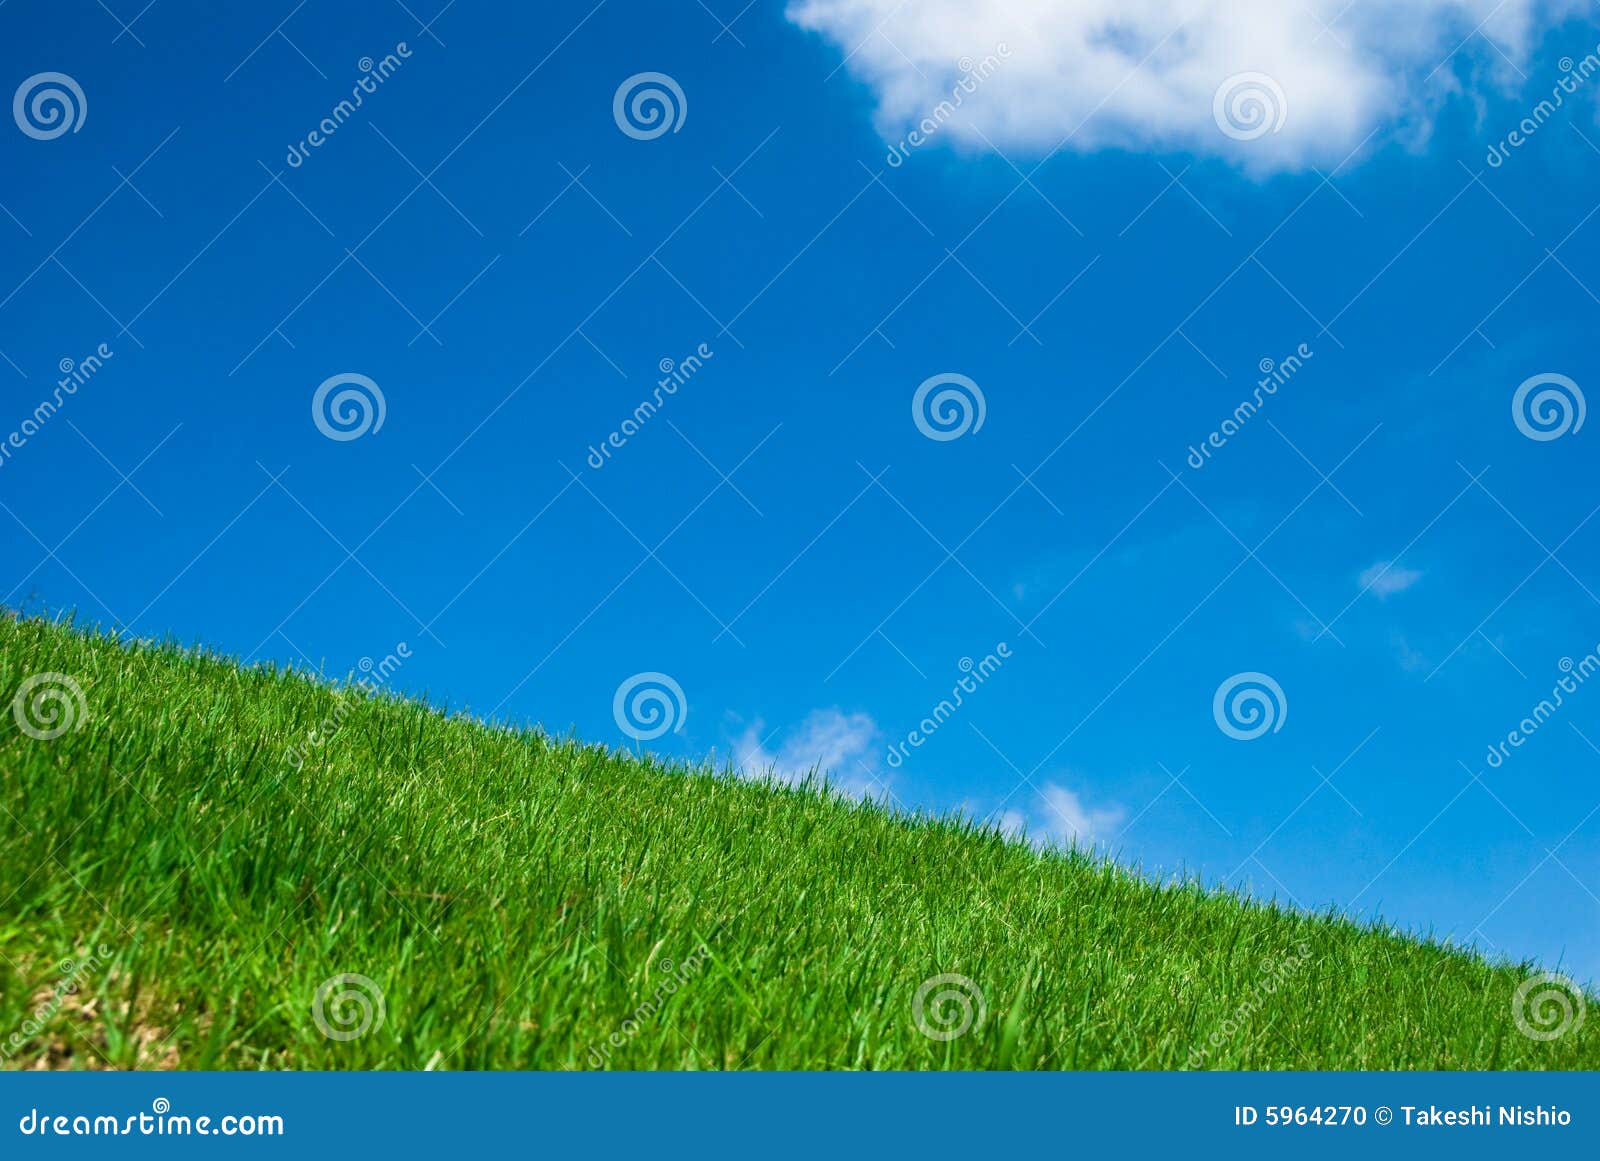 Green Grass Under The Blue Sky Stock Photo Image Of Meadow